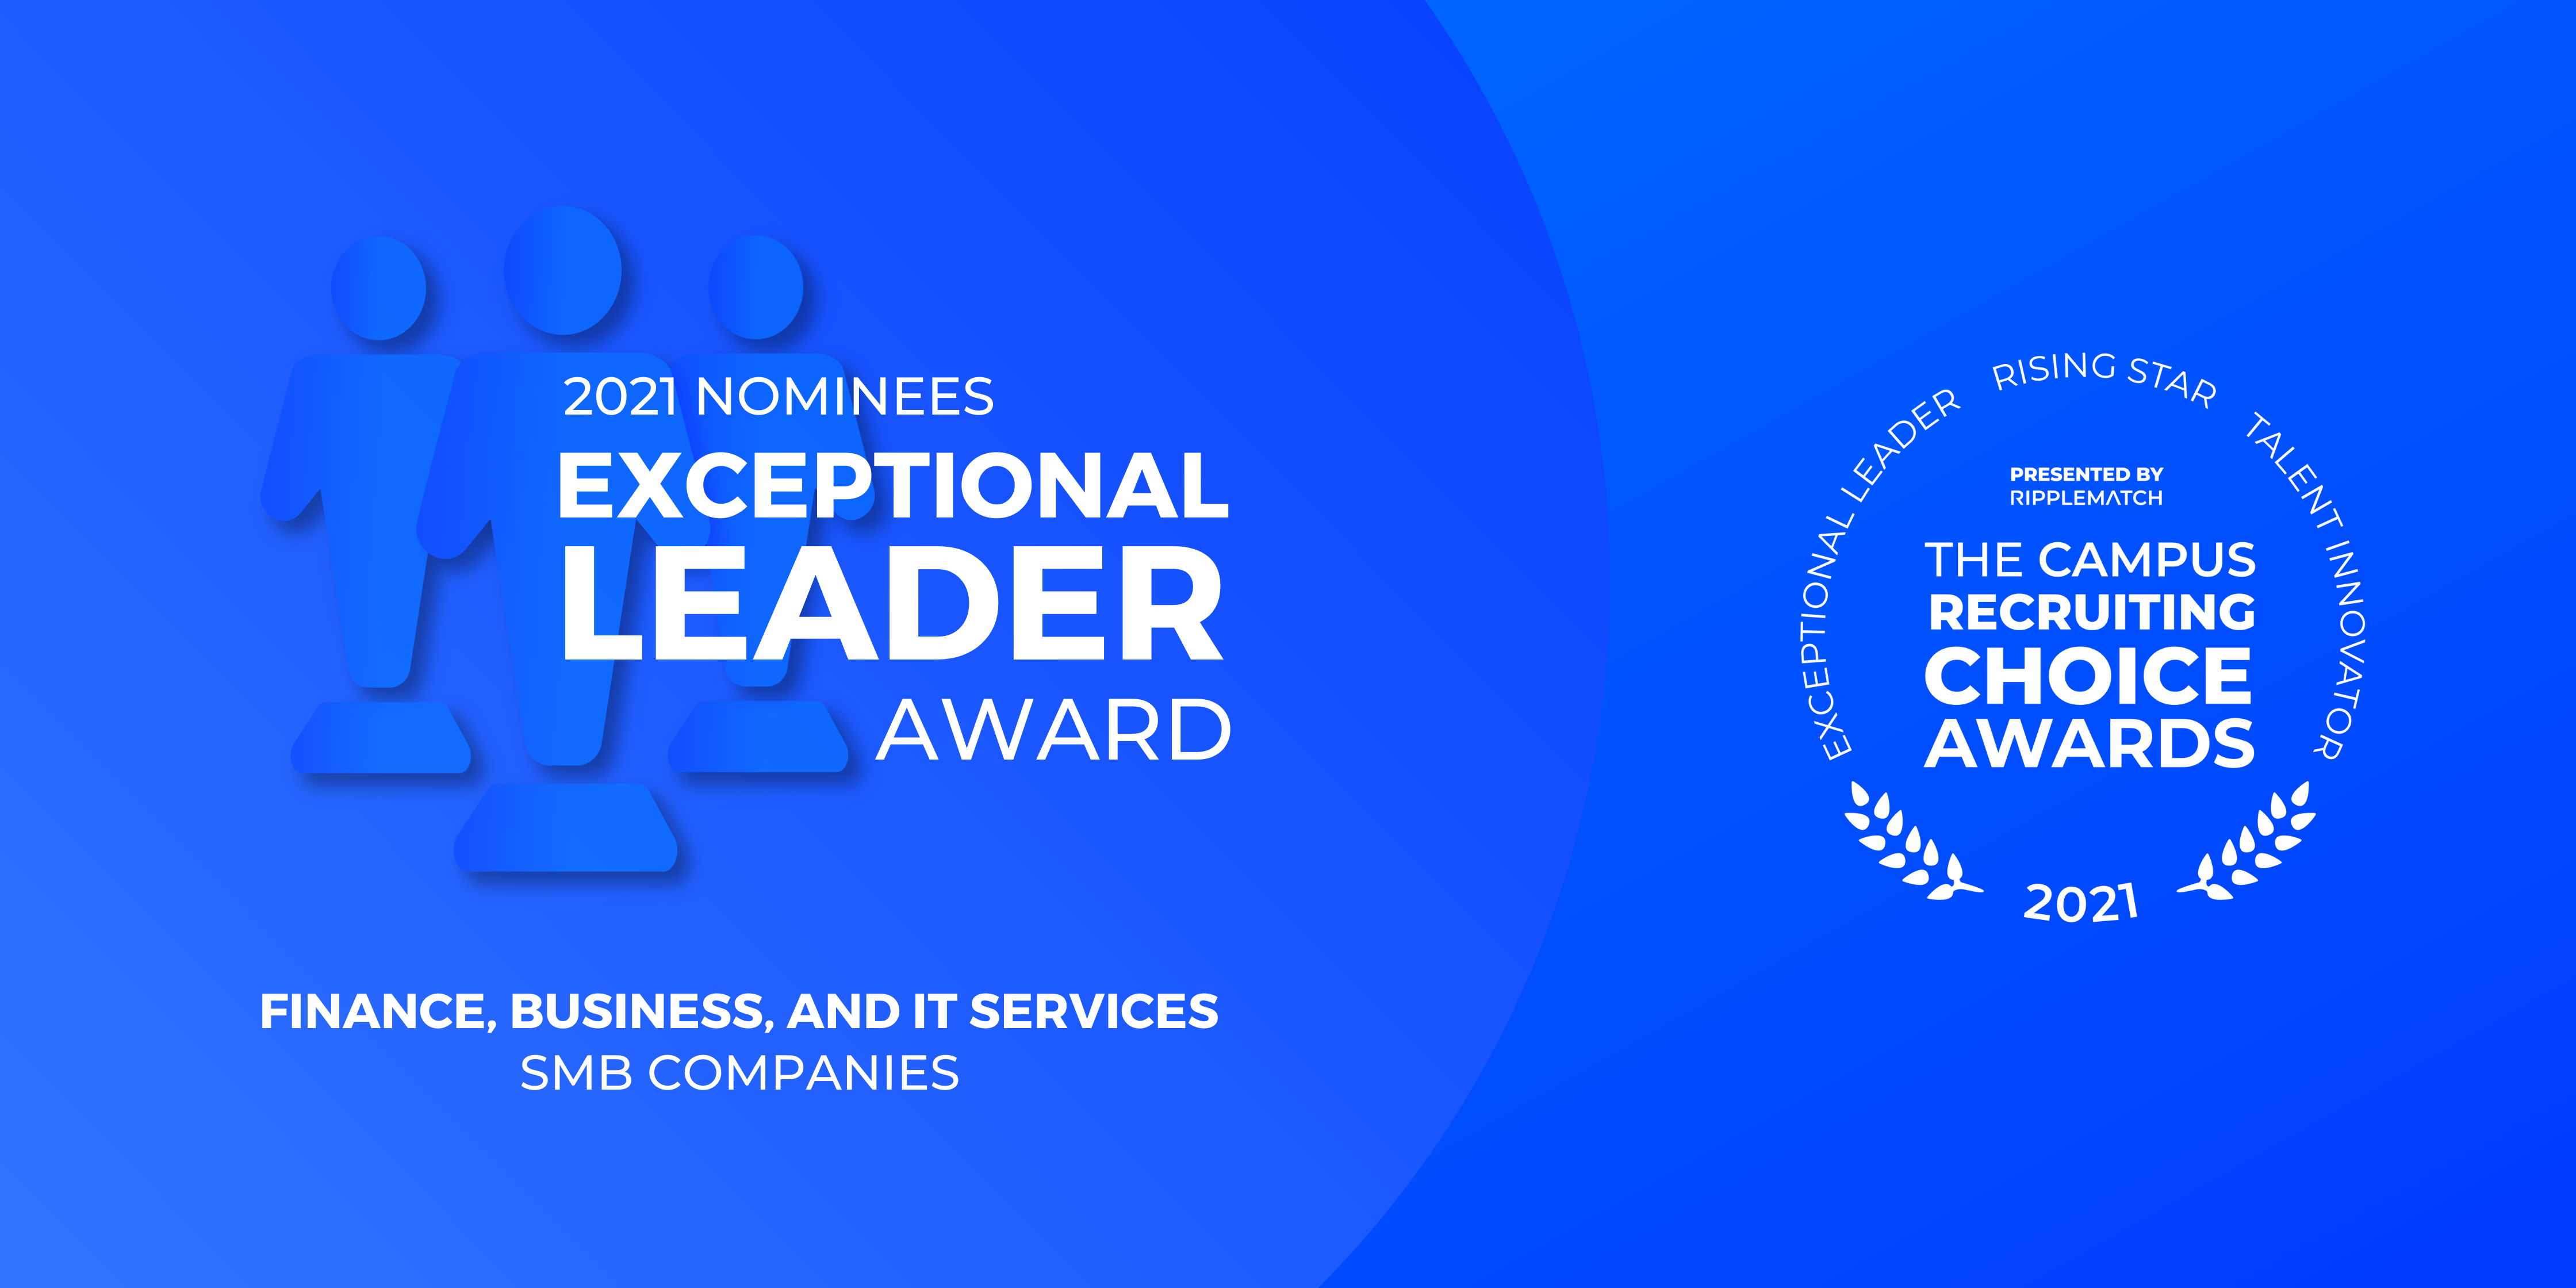 Exceptional Leader Award - Finance, Business, and IT Services | SMB Companies